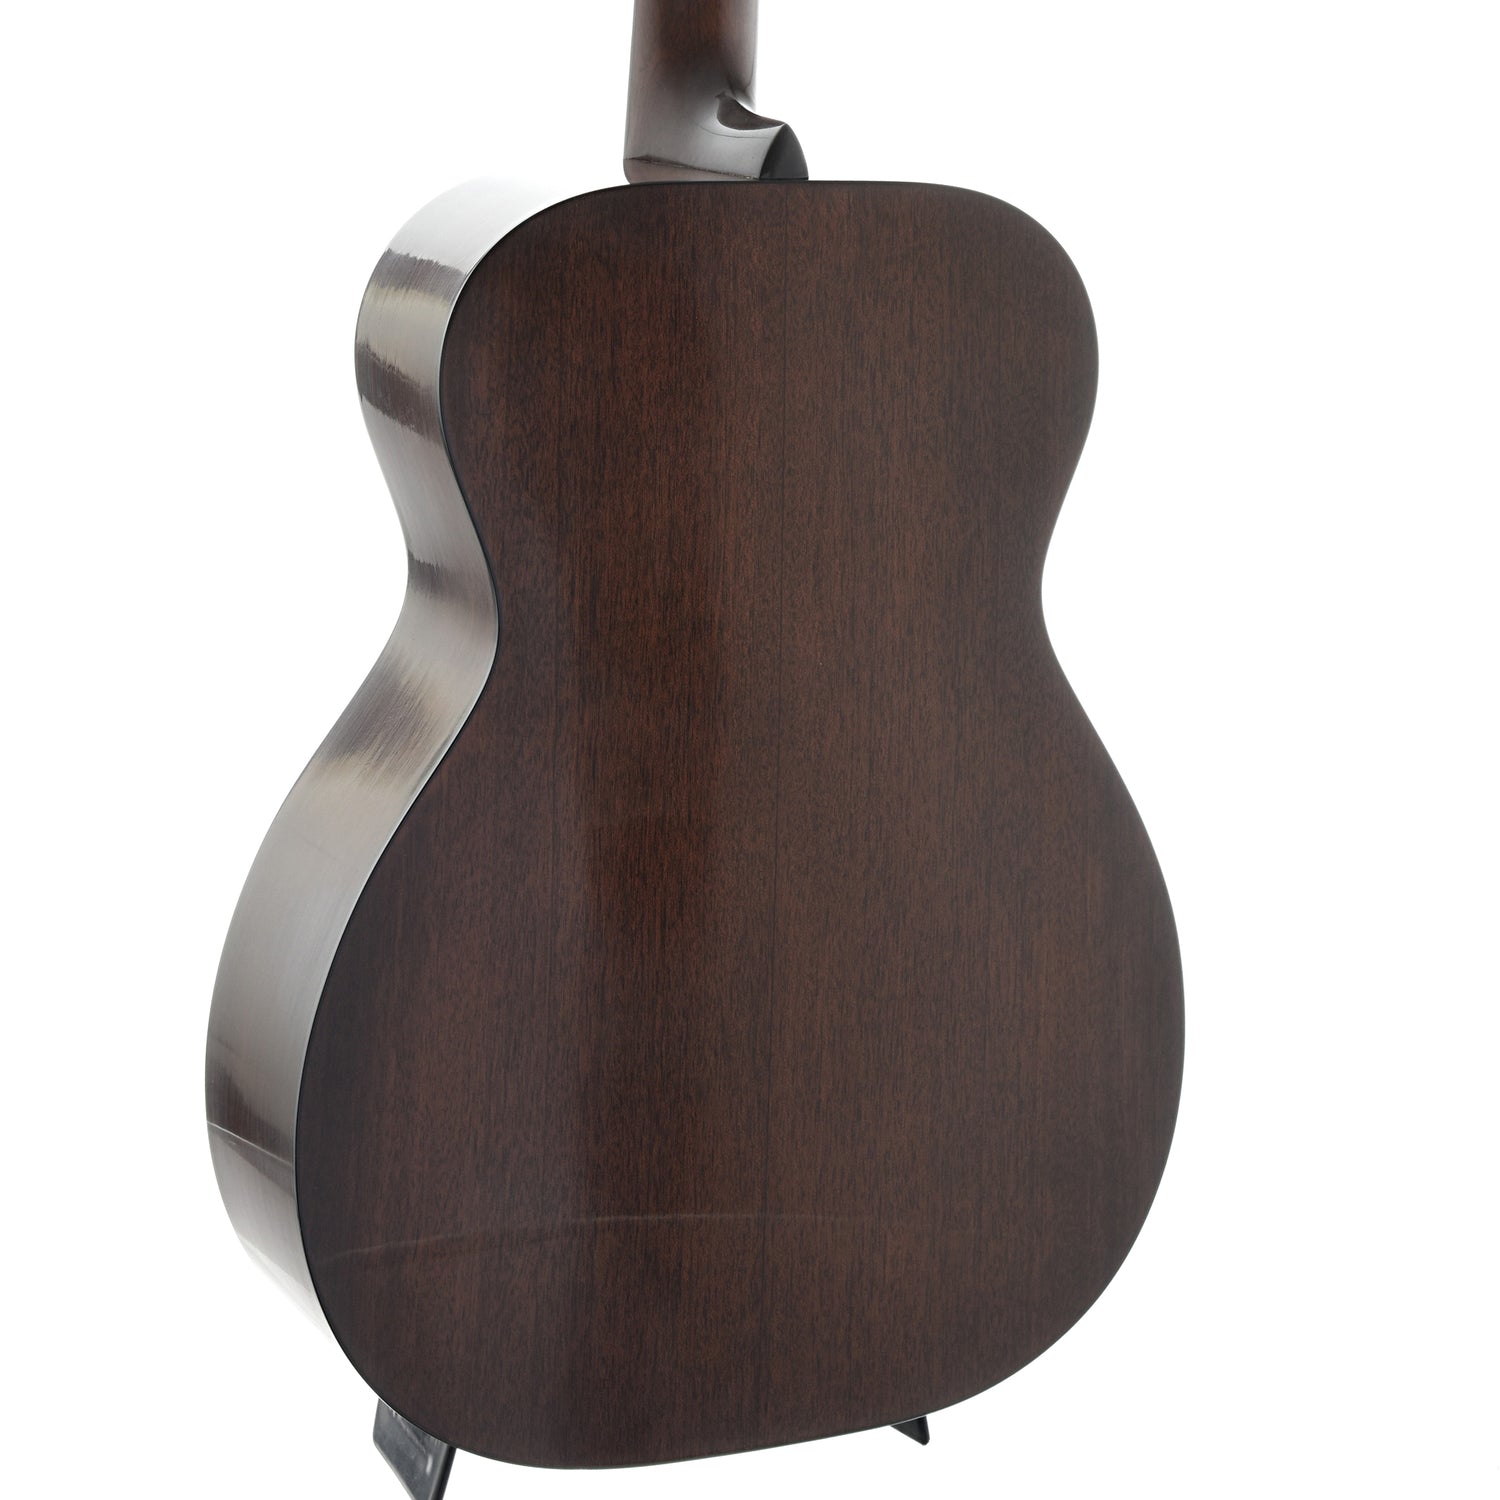 Image 9 of Pre-War Guitars Co. Triple-O Mahogany, Level 1 Aging - SKU# PW000M : Product Type Flat-top Guitars : Elderly Instruments